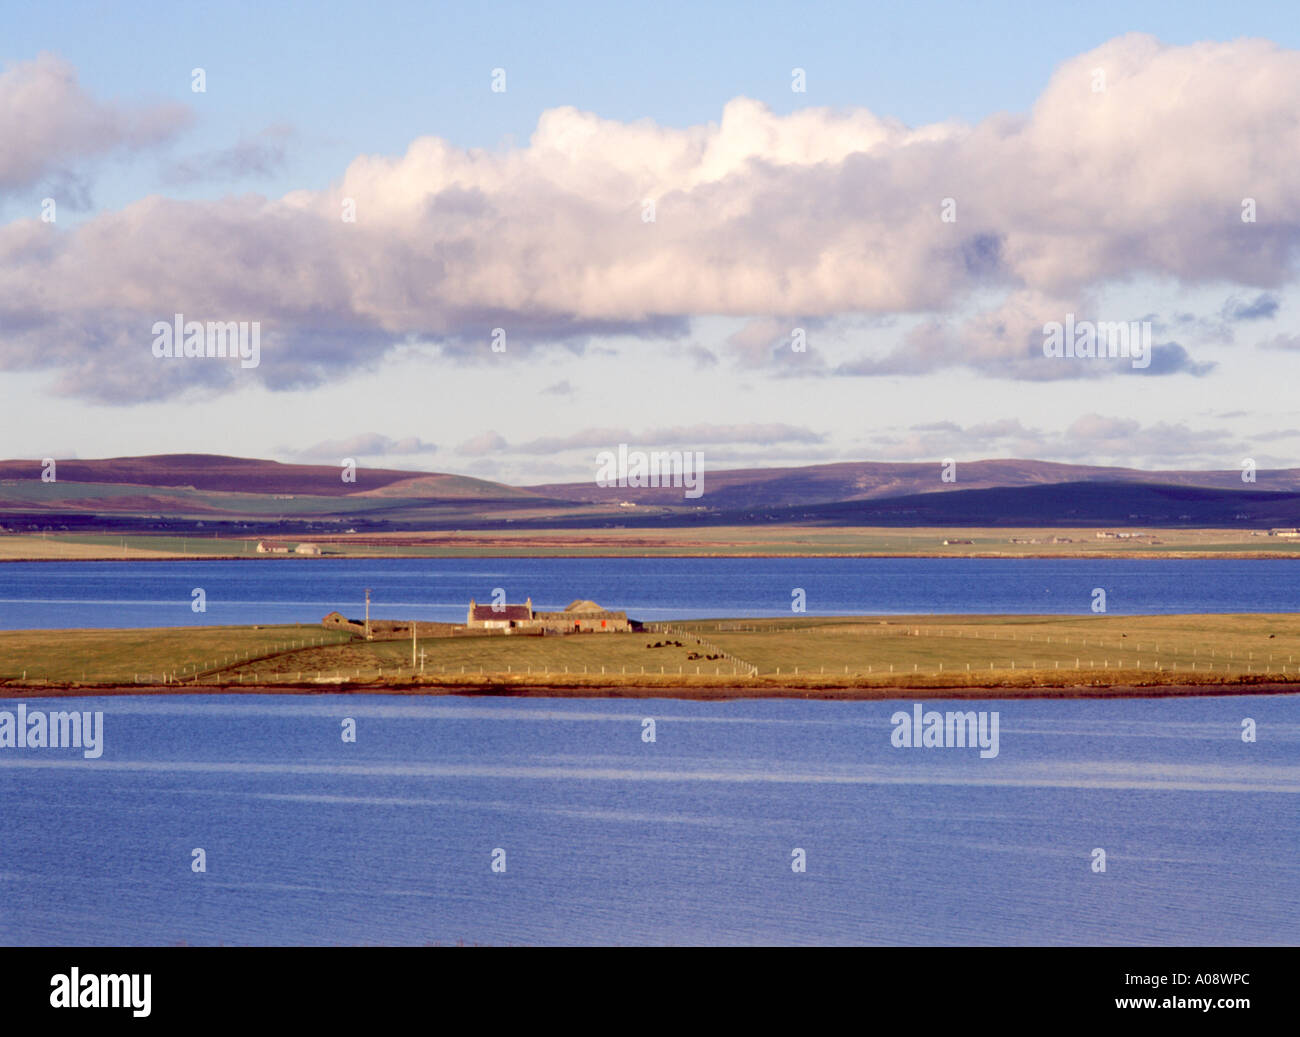 dh Bay of Firth FIRTH ORKNEY Farm on Holm of Grimbister Island colonica casa remota Scozia uk scottish Islands cottage Northern croft Isles Foto Stock